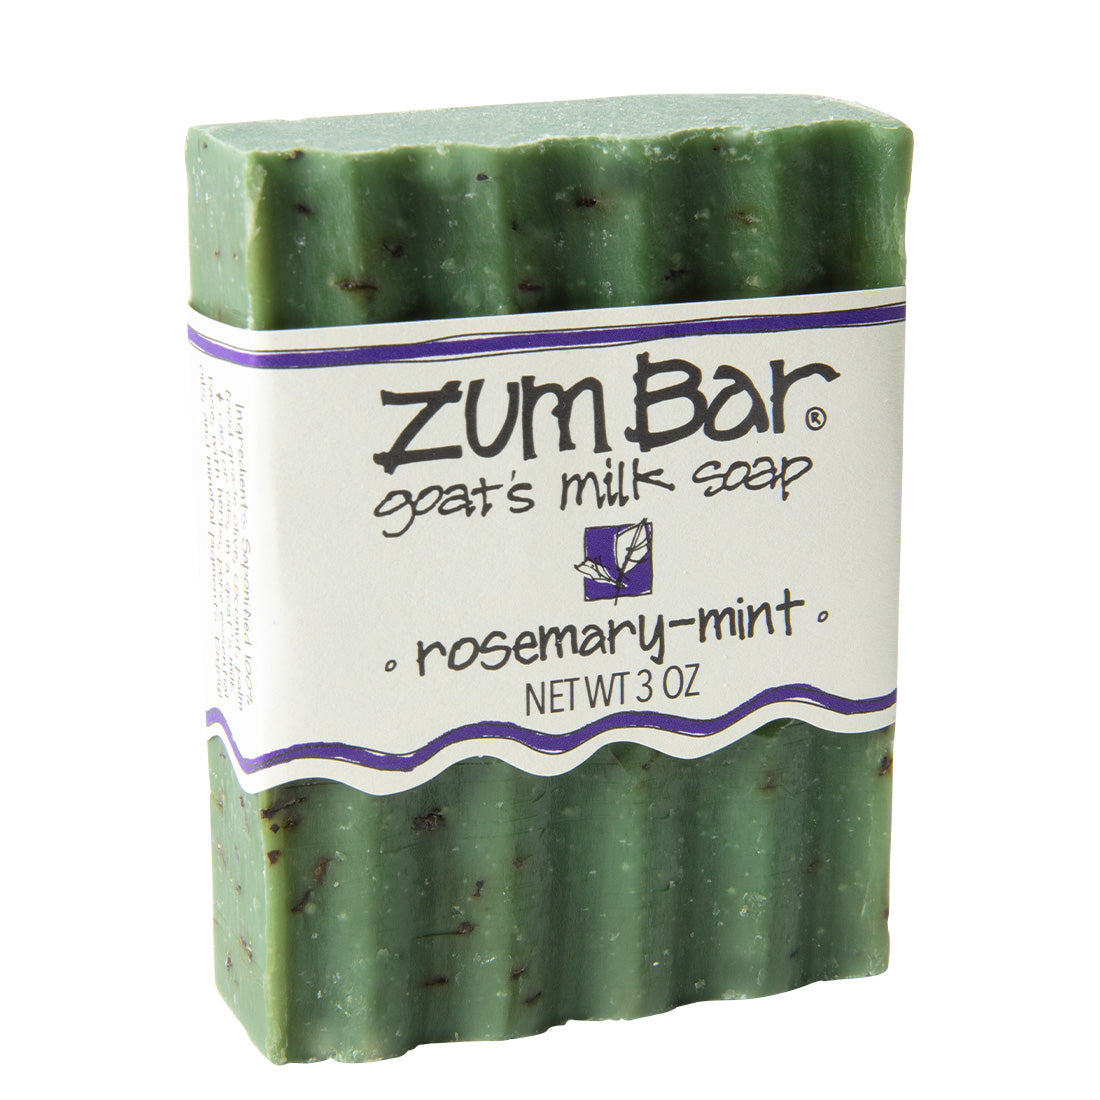 Labeled rosemary-mint scented Zum Bar Soap with speckled green coloring